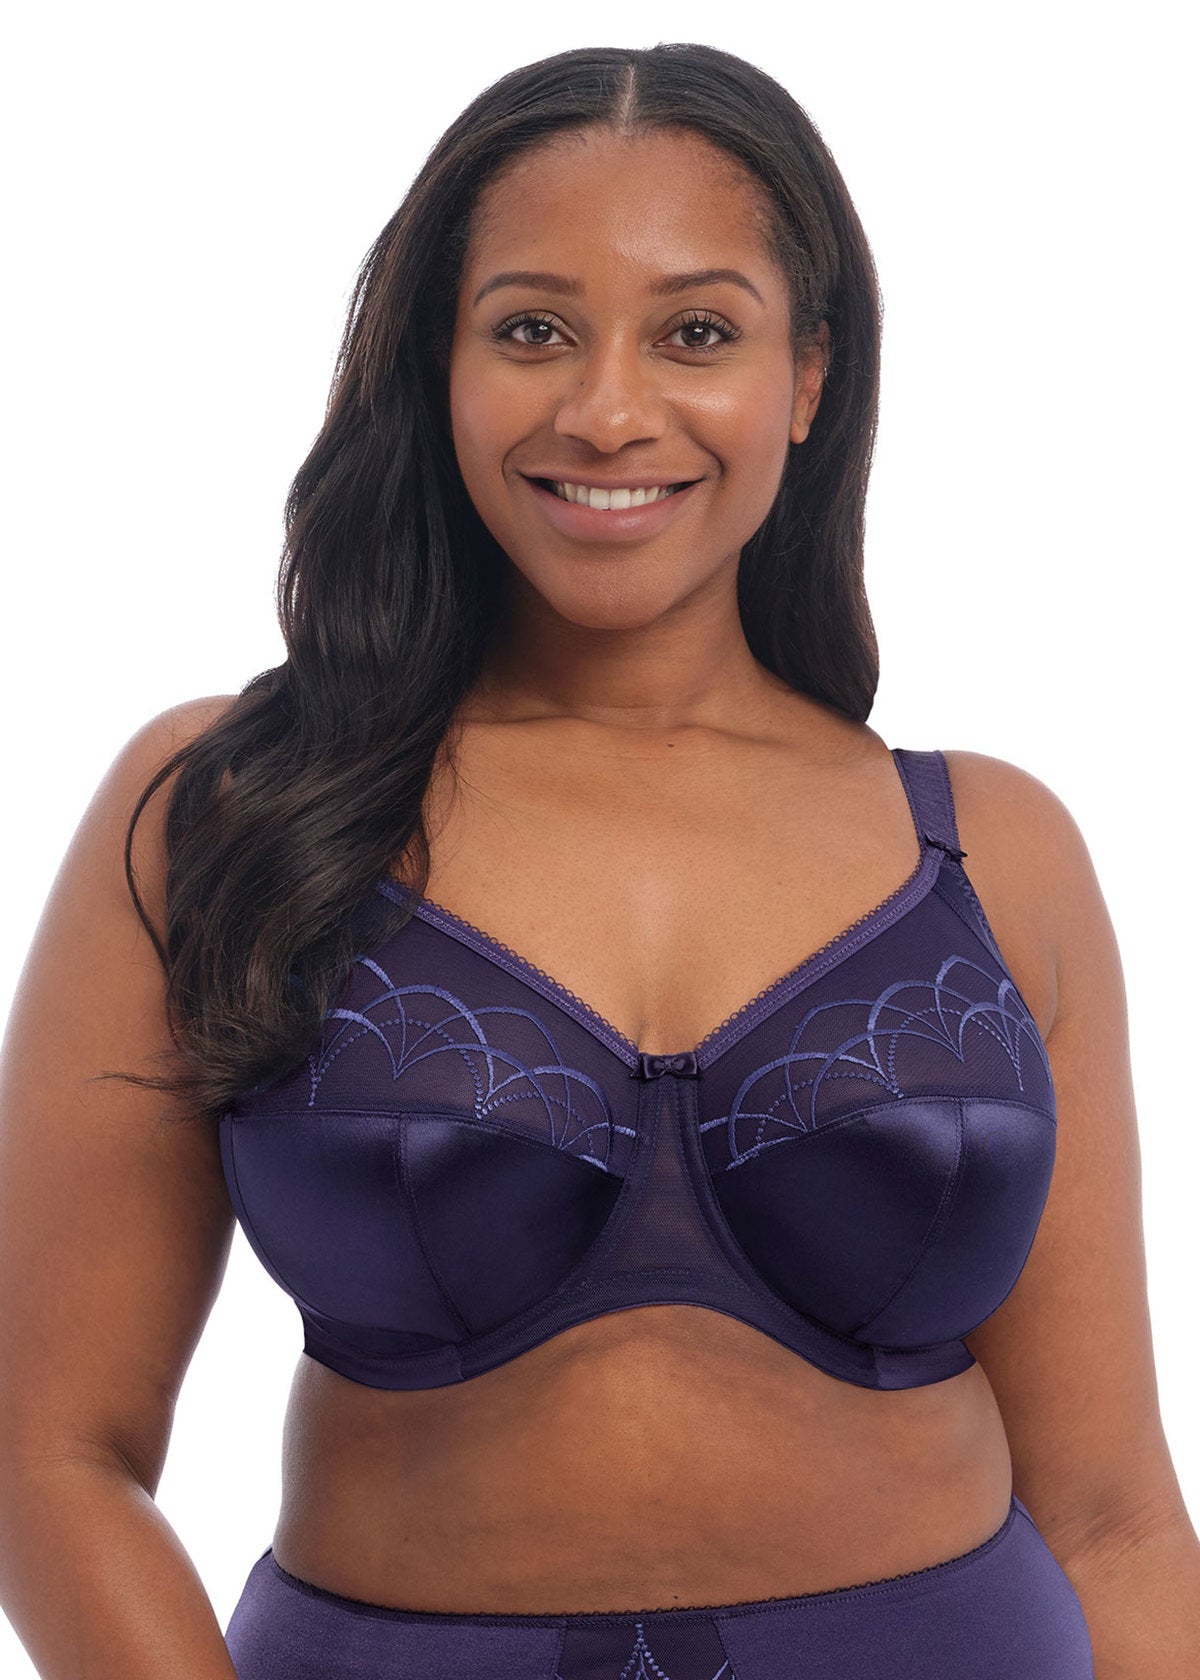 Full Cup Bras - Fantasie, Elomi, Wacoal – Tagged size-36hh